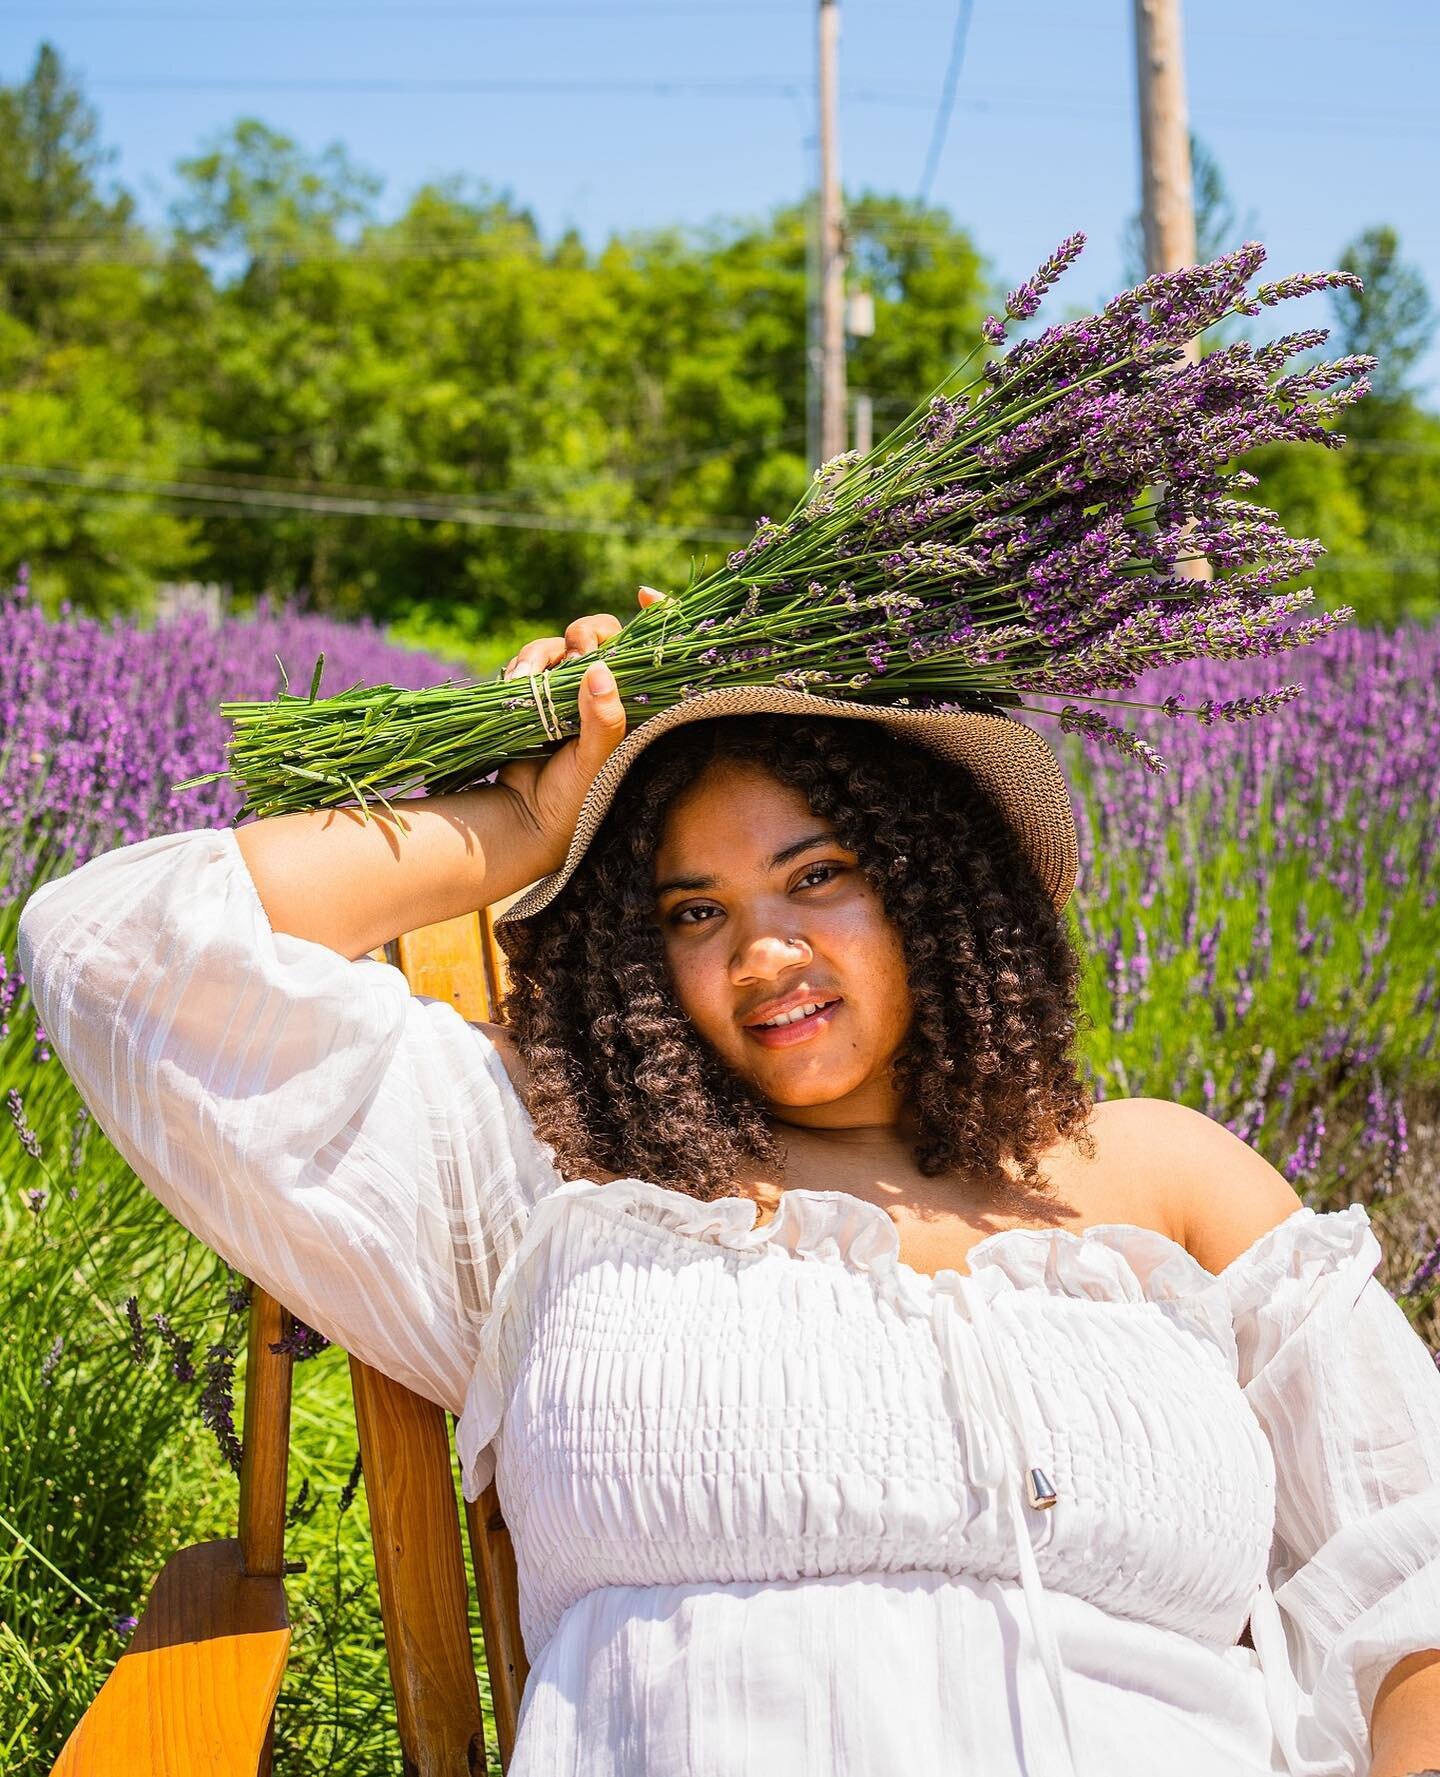 💜Lay back &amp; smell the Lavender 💜⁠⁠
⁠⁠
The second photo is giving me cottagecore, did I nail it?hmmm 🧐⁠⁠
⁠⁠
📌Snofalls Lavender Farm⁠⁠
⁠⁠
The owner of this field was so sweet and kind to me she even lent me this basket so that I could pretend t